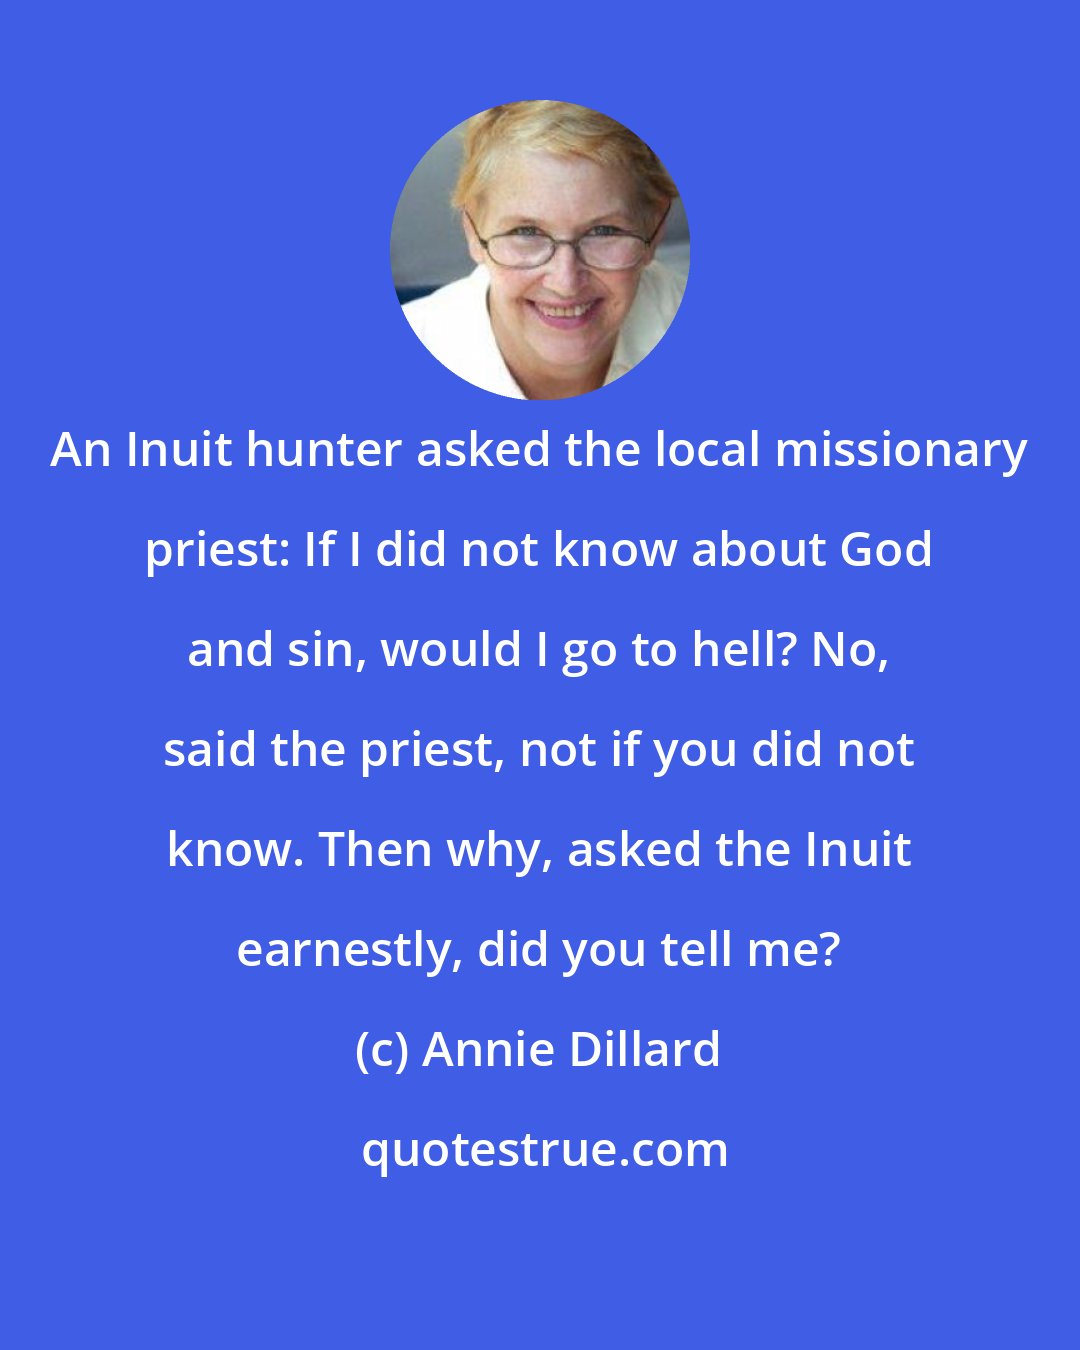 Annie Dillard: An Inuit hunter asked the local missionary priest: If I did not know about God and sin, would I go to hell? No, said the priest, not if you did not know. Then why, asked the Inuit earnestly, did you tell me?